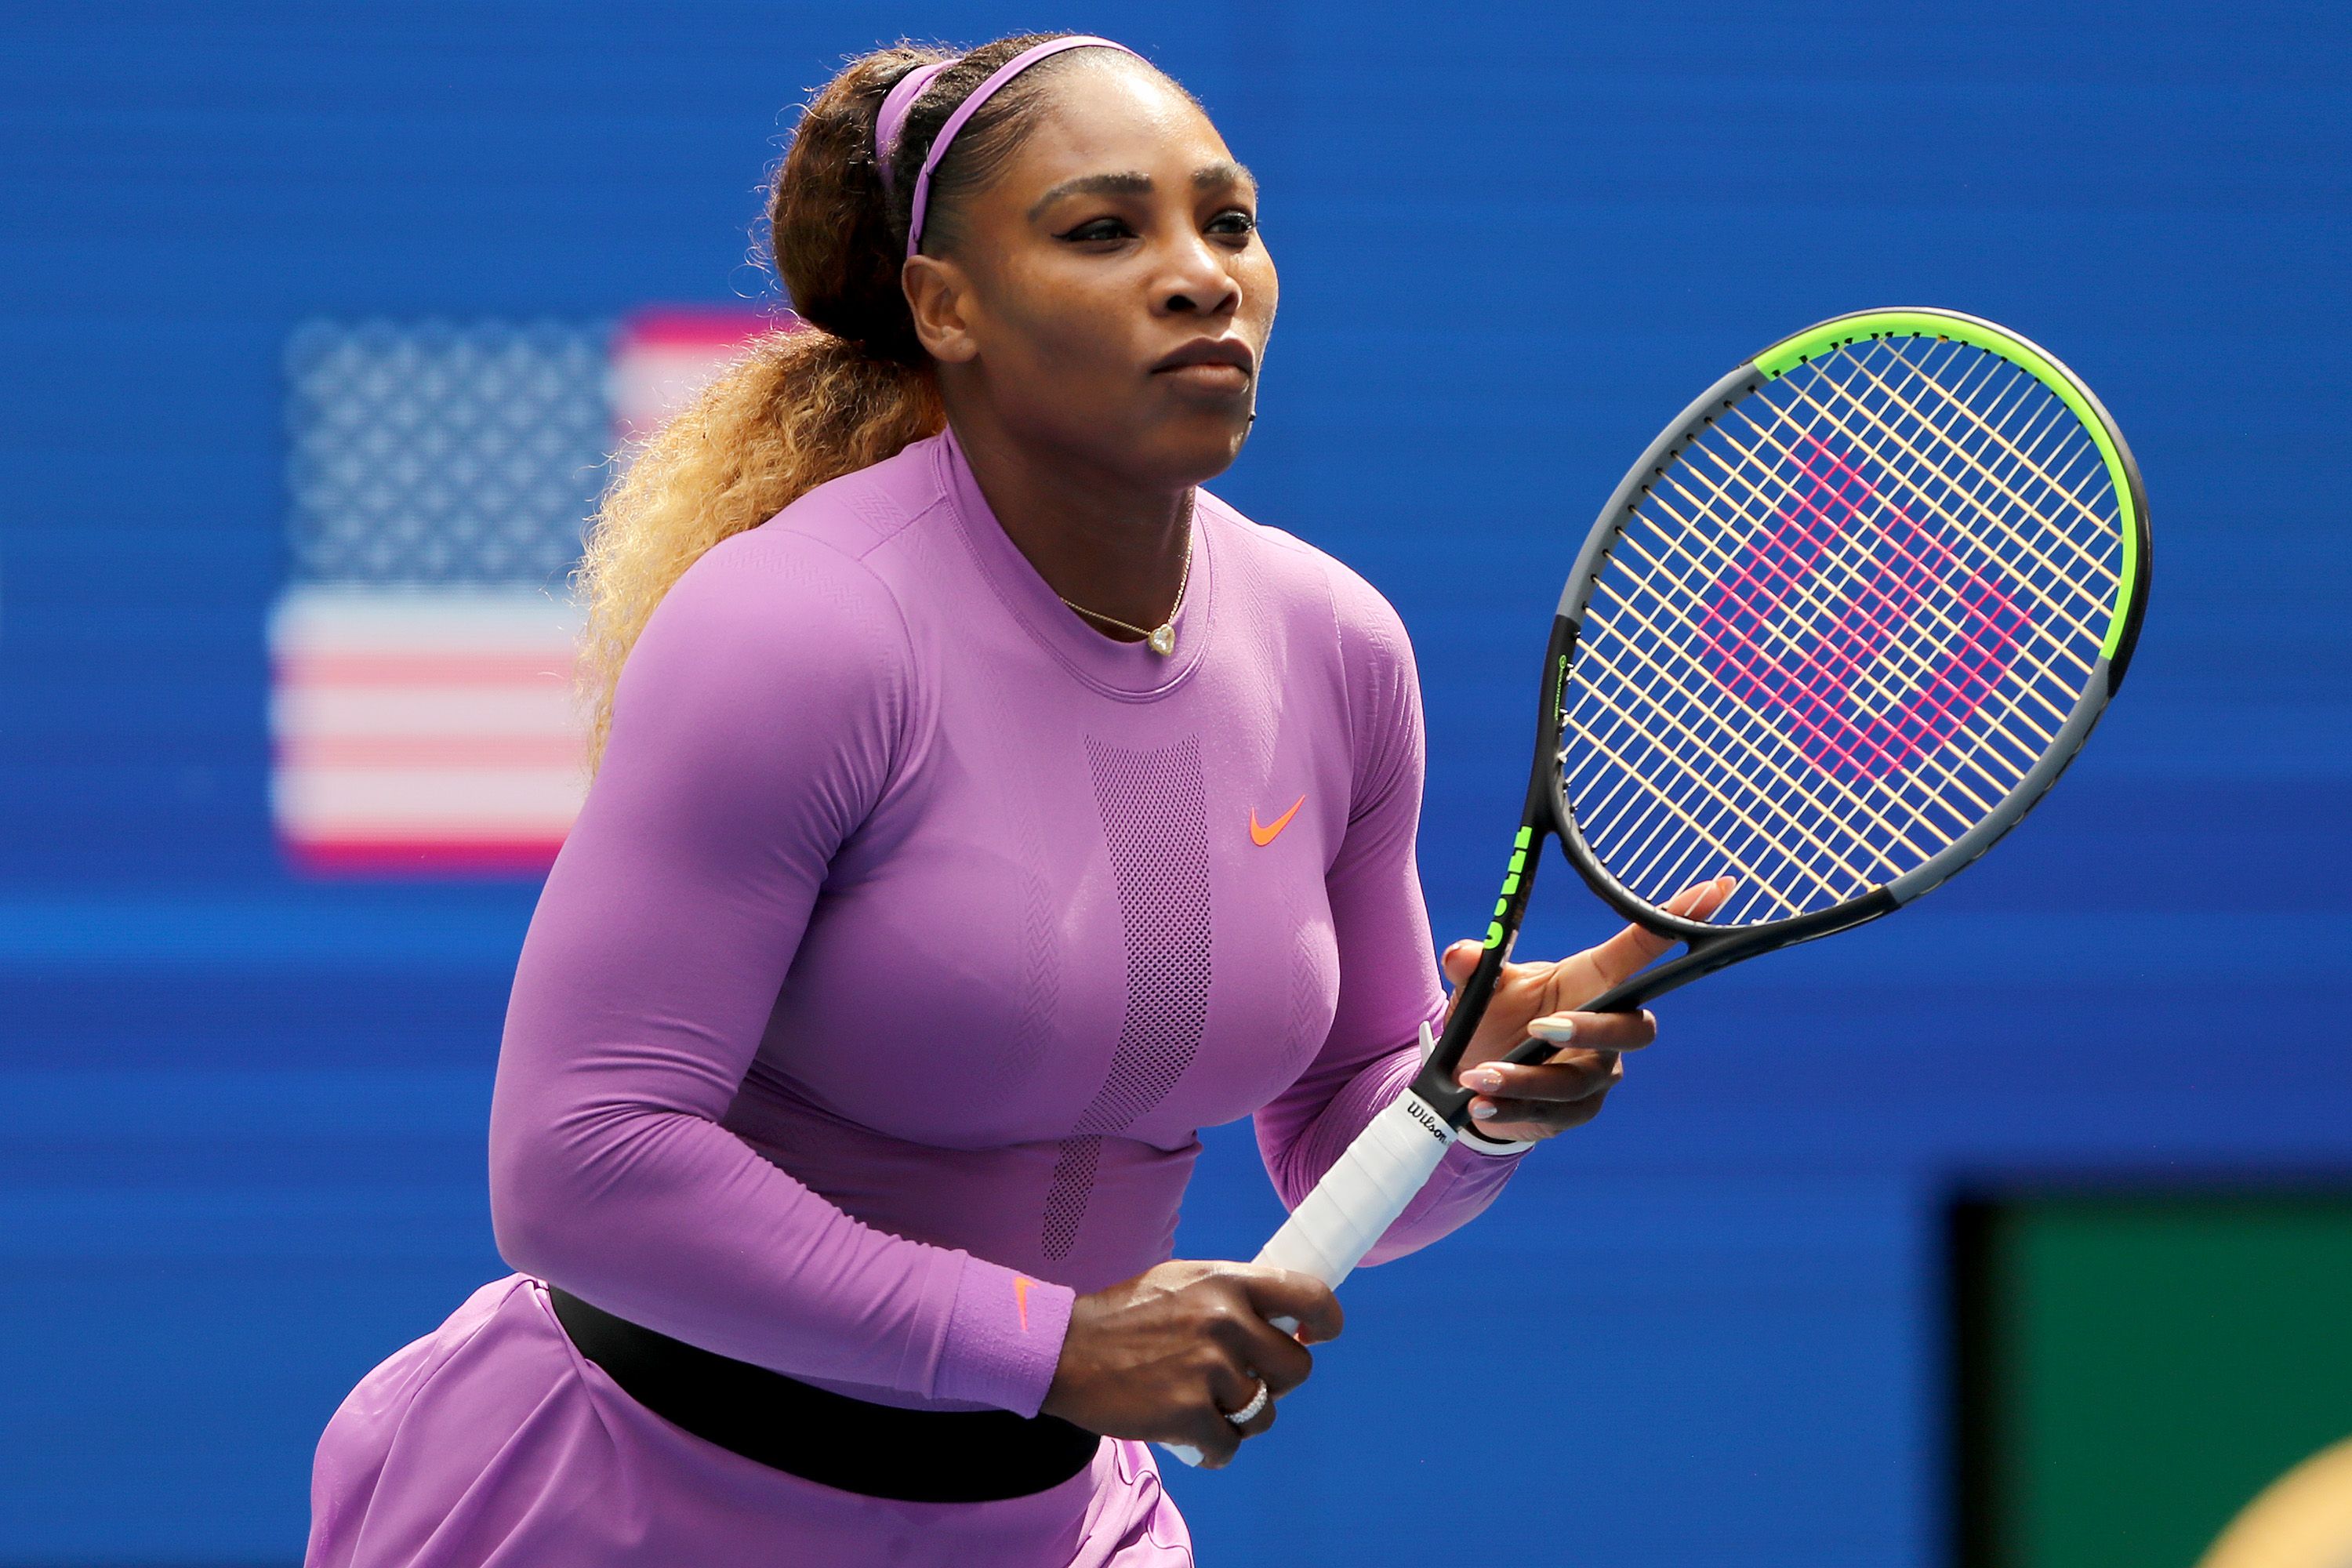 How to Watch Serena Williams Play the 2022 U.S